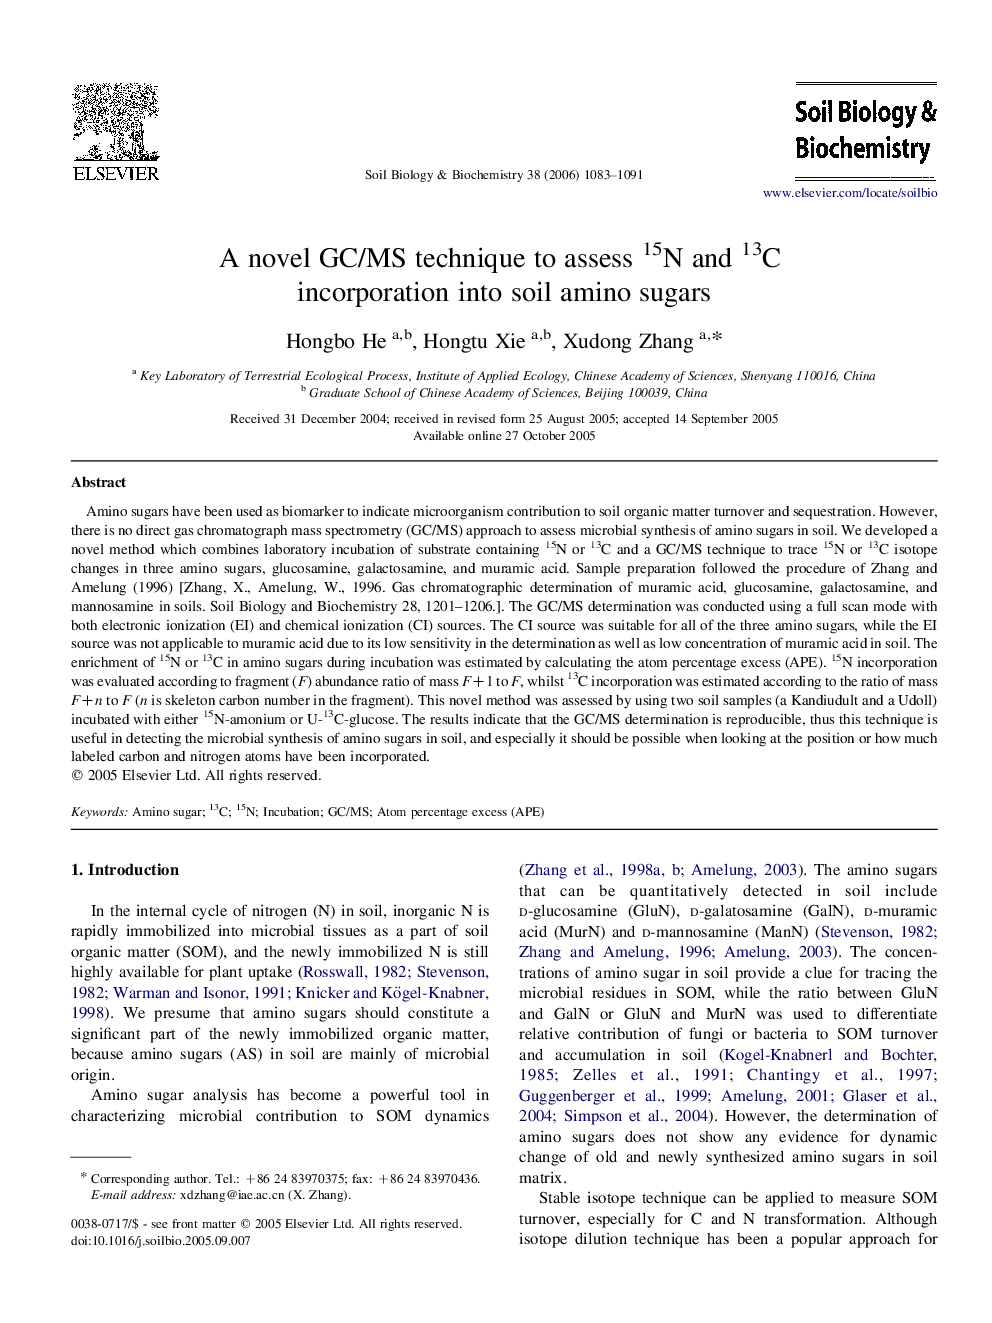 A novel GC/MS technique to assess 15N and 13C incorporation into soil amino sugars